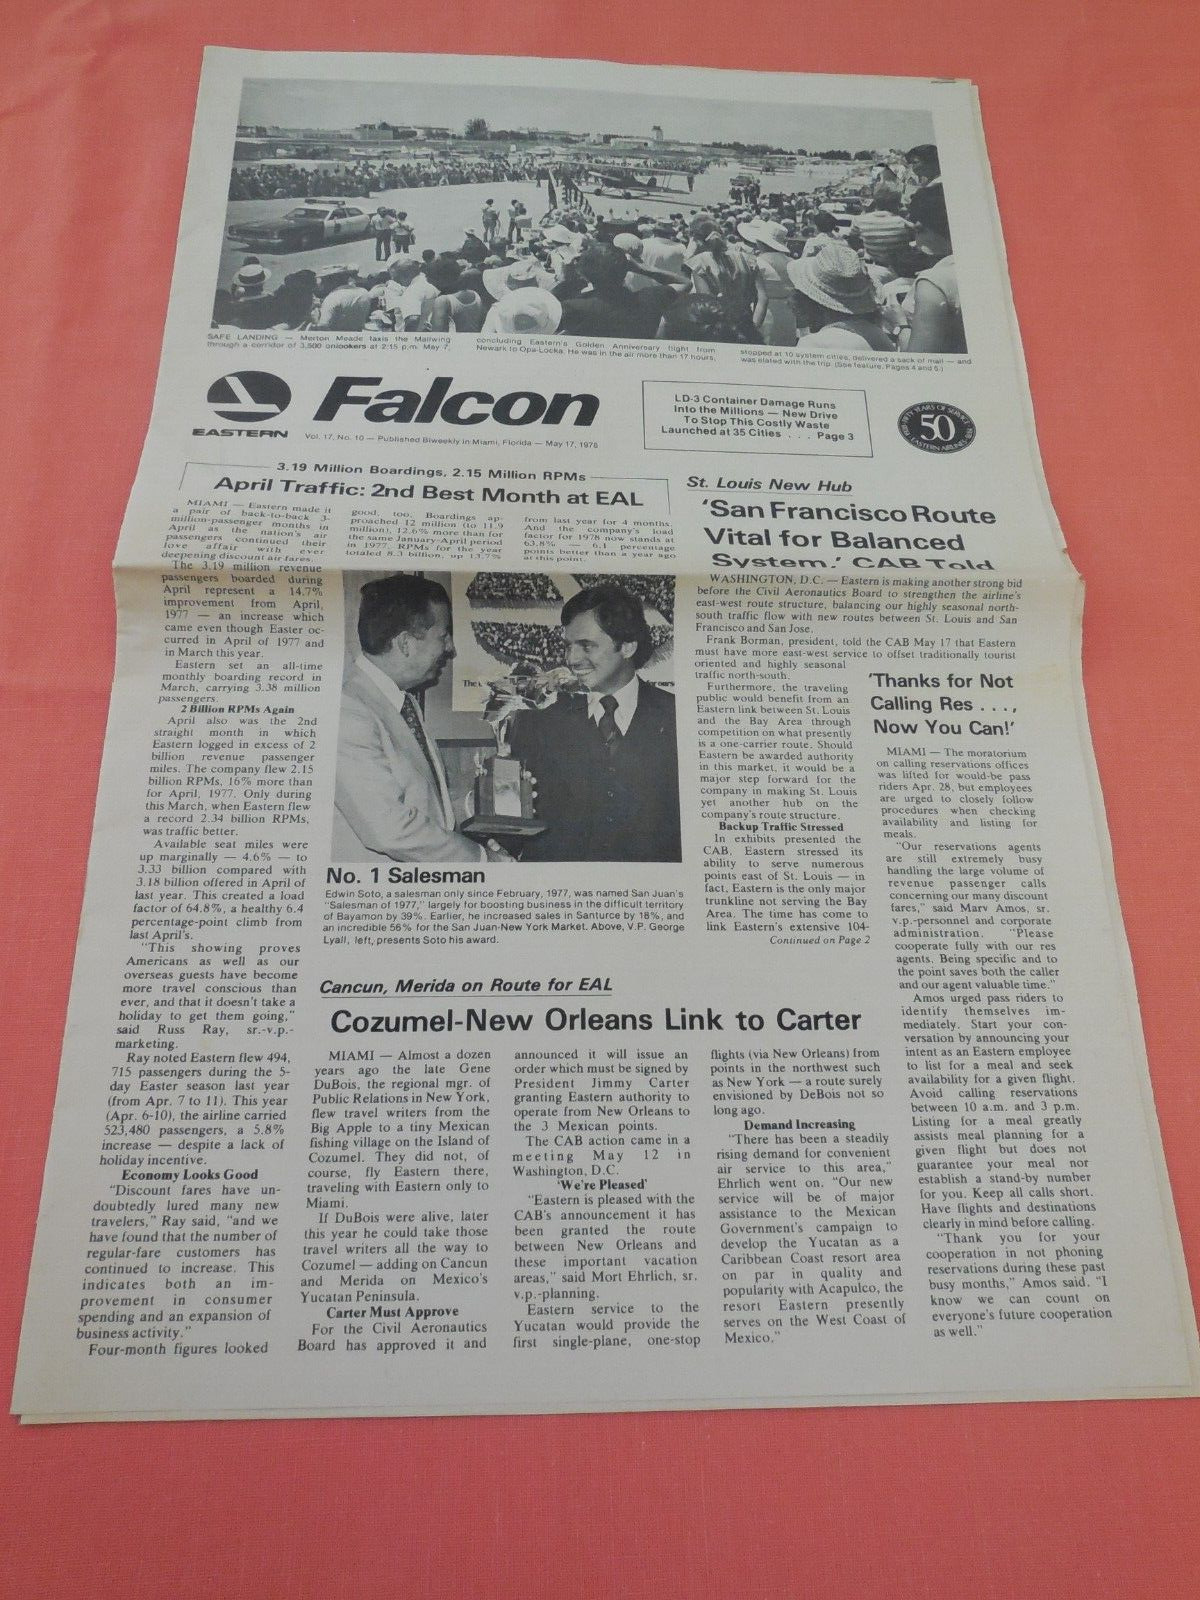 Lot of 3 ~ EASTERN AIRLINES FALCON EMPLOYEE NEWSPAPERS ~ 1978-1989